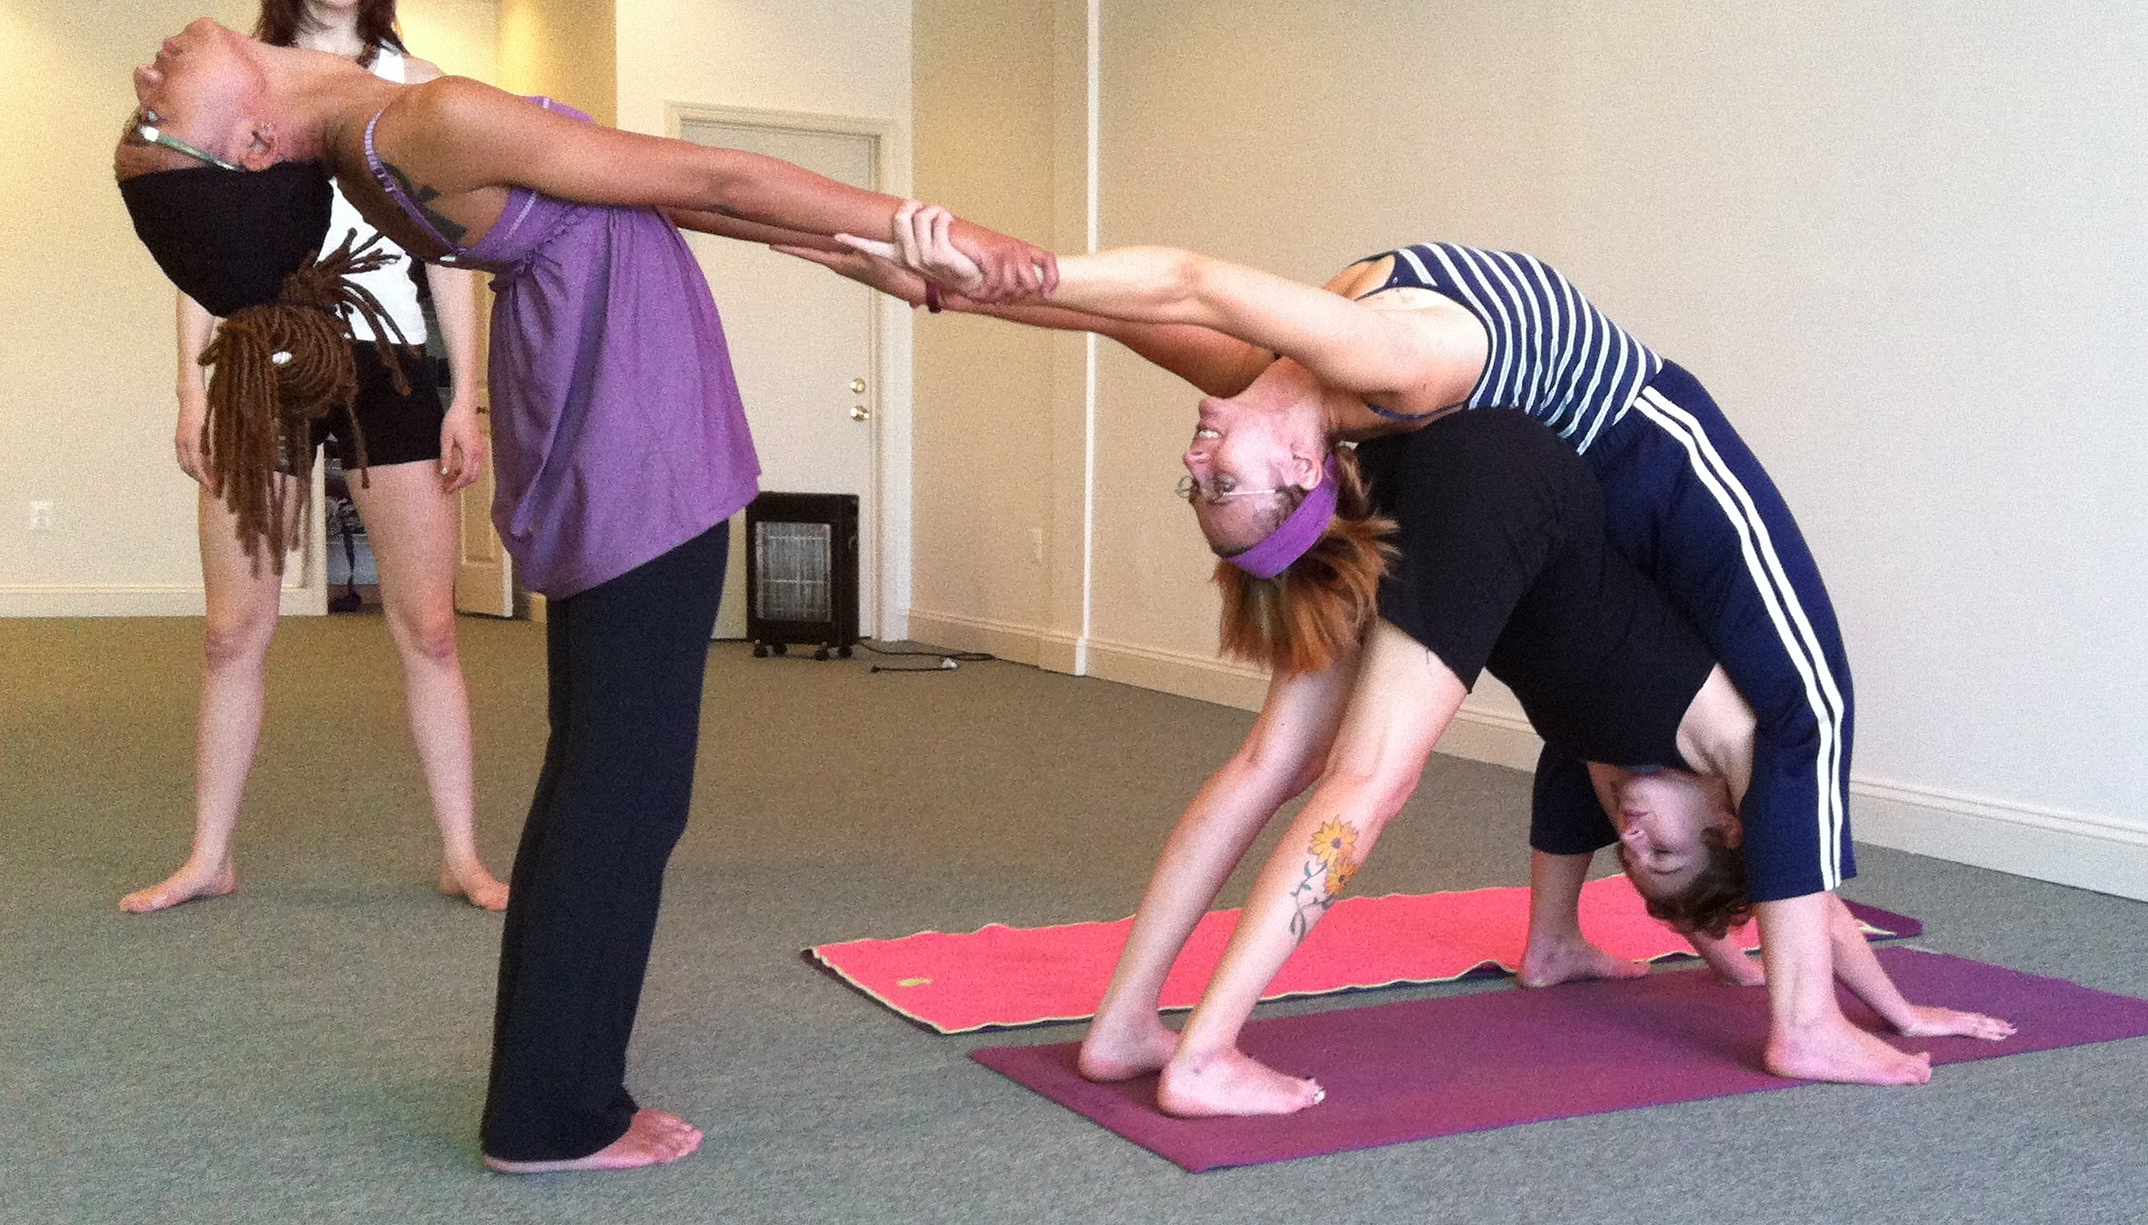 they as  advanced  Intermediate/Advanced poses Beginners attend  to may for beginners Yogis. yoga long as Who: